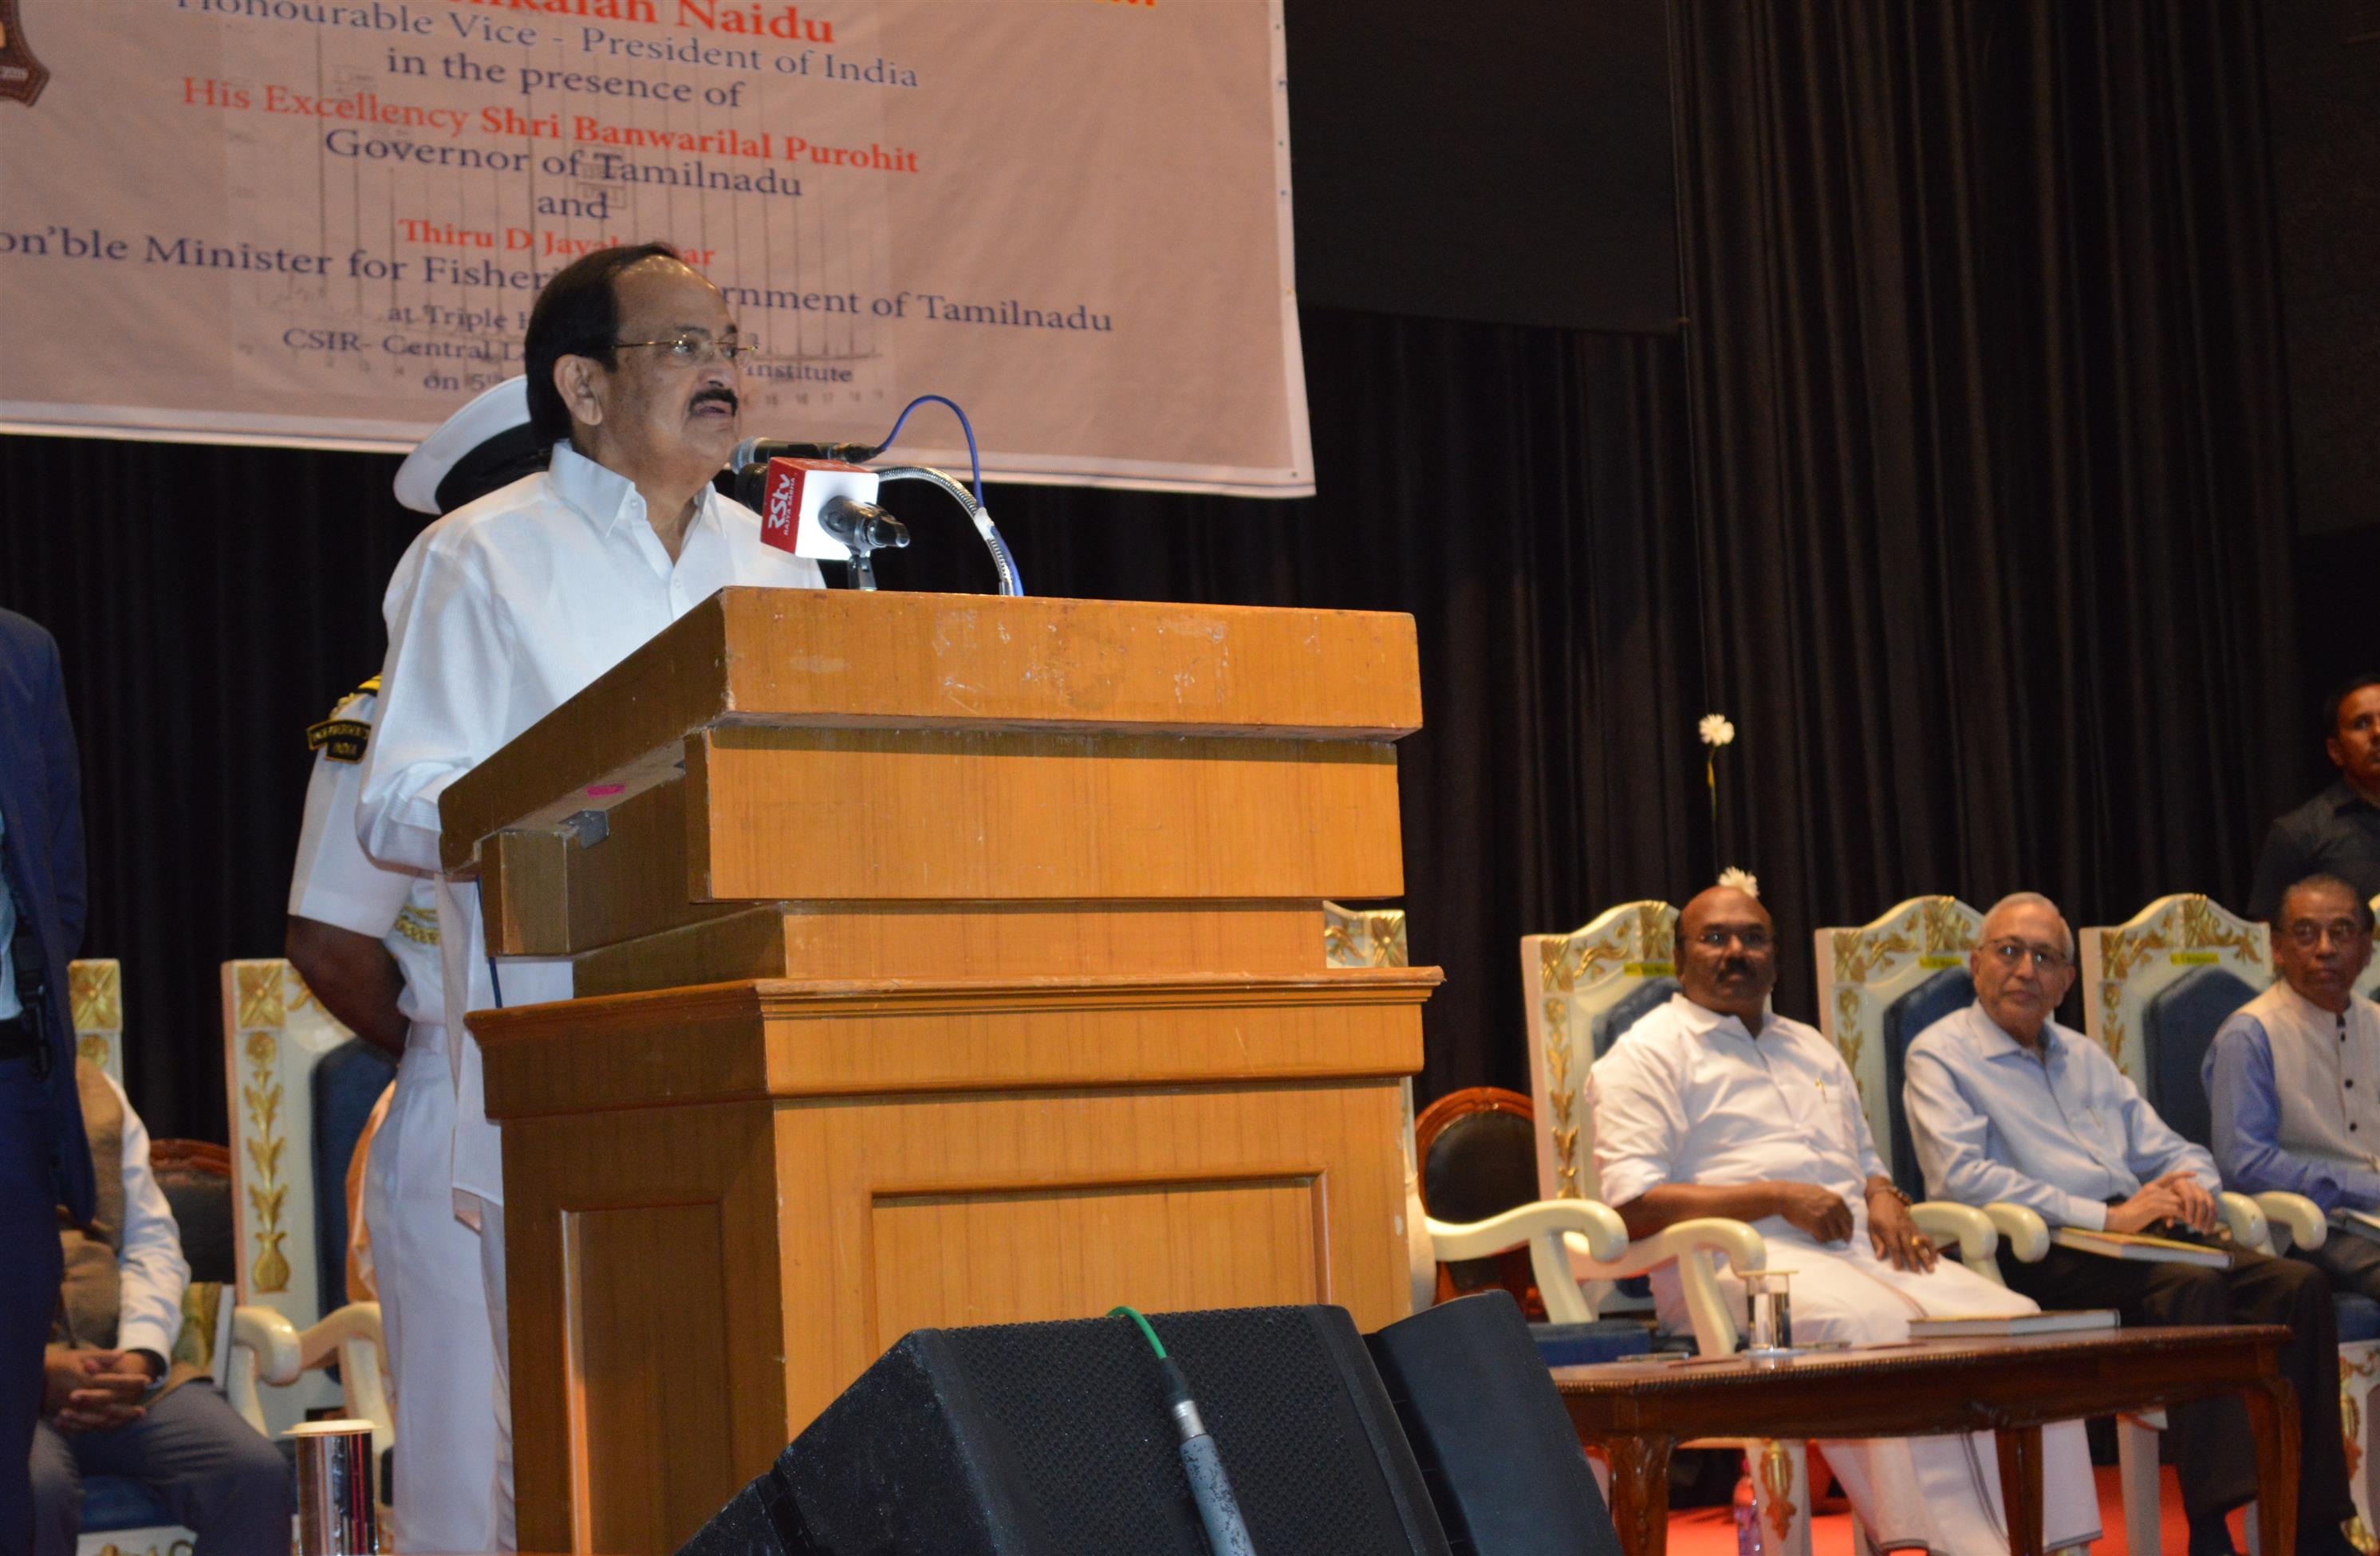 Vice President of India Shri M. Venkaiah Naidu addressing the gathering after releasing the monograph on 'Musical Excellence of Mridangam' at an event organised at CLRI Chennai. 